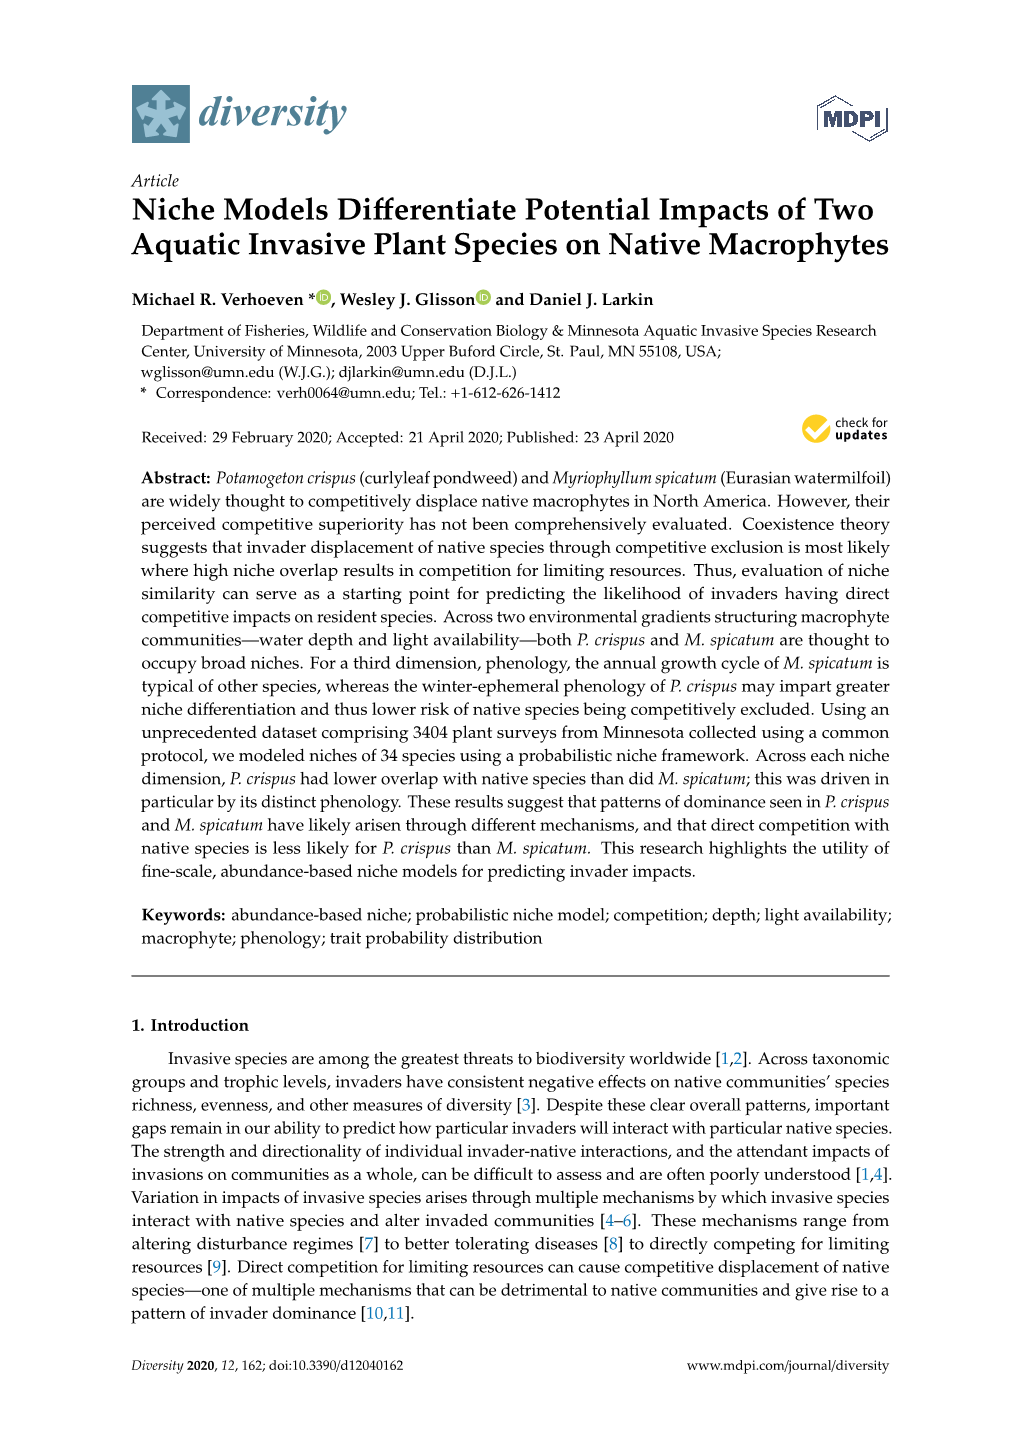 Niche Models Differentiate Potential Impacts of Two Aquatic Invasive